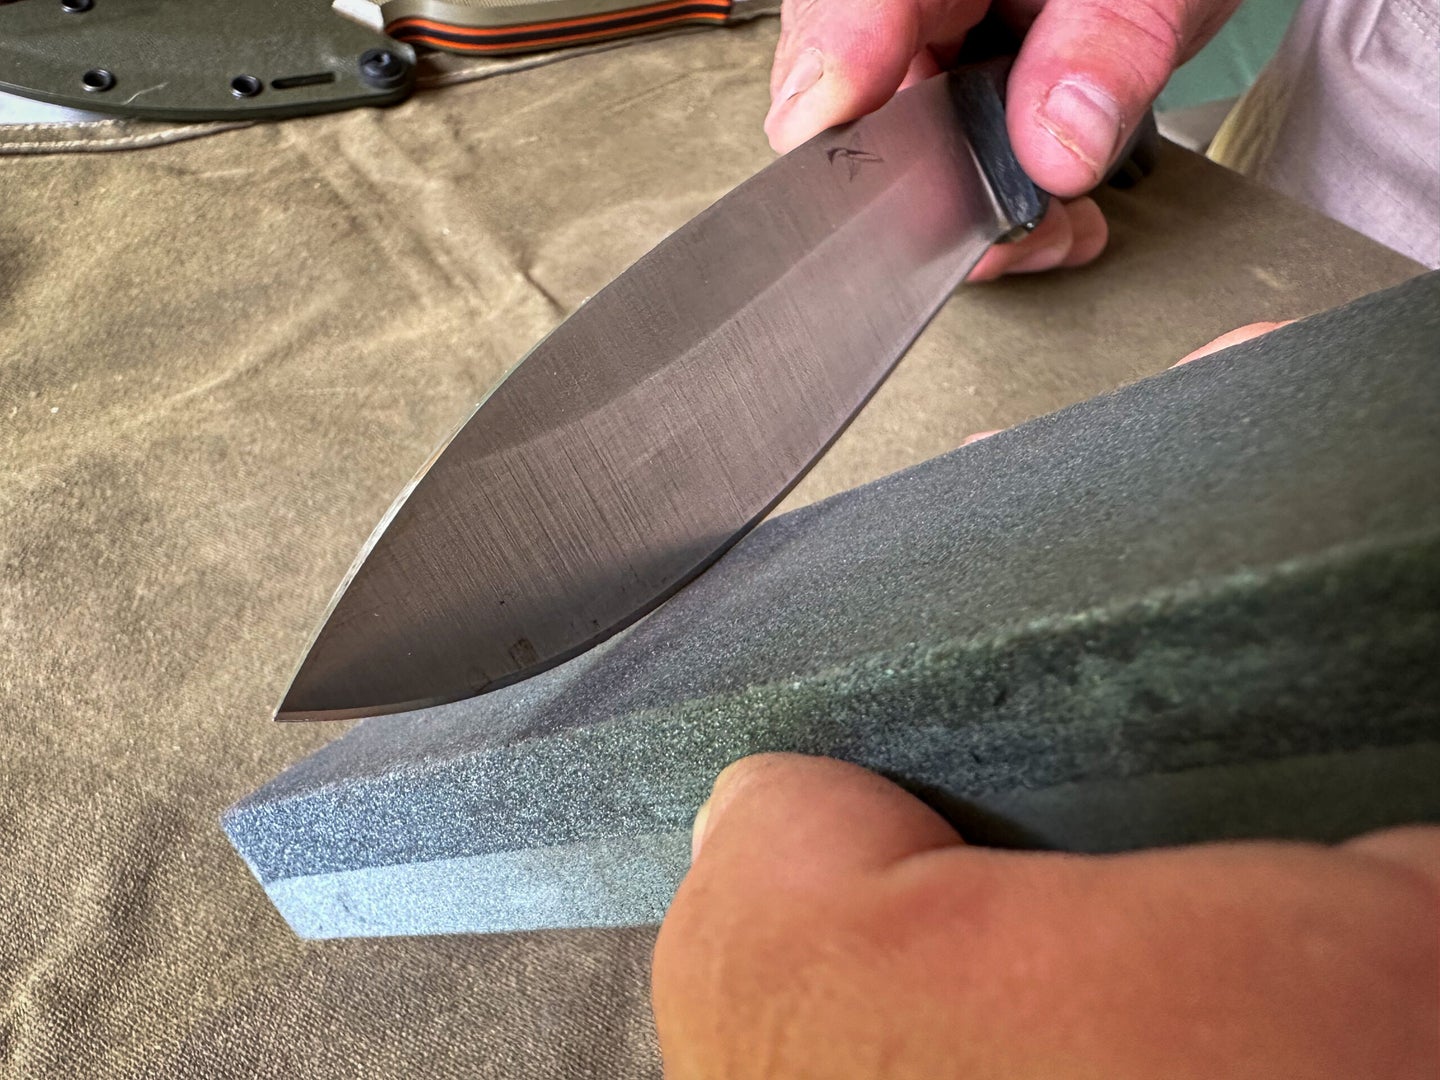 How To Test The Sharpness Of A Knife - Top 5 Tests For Sharp Knives